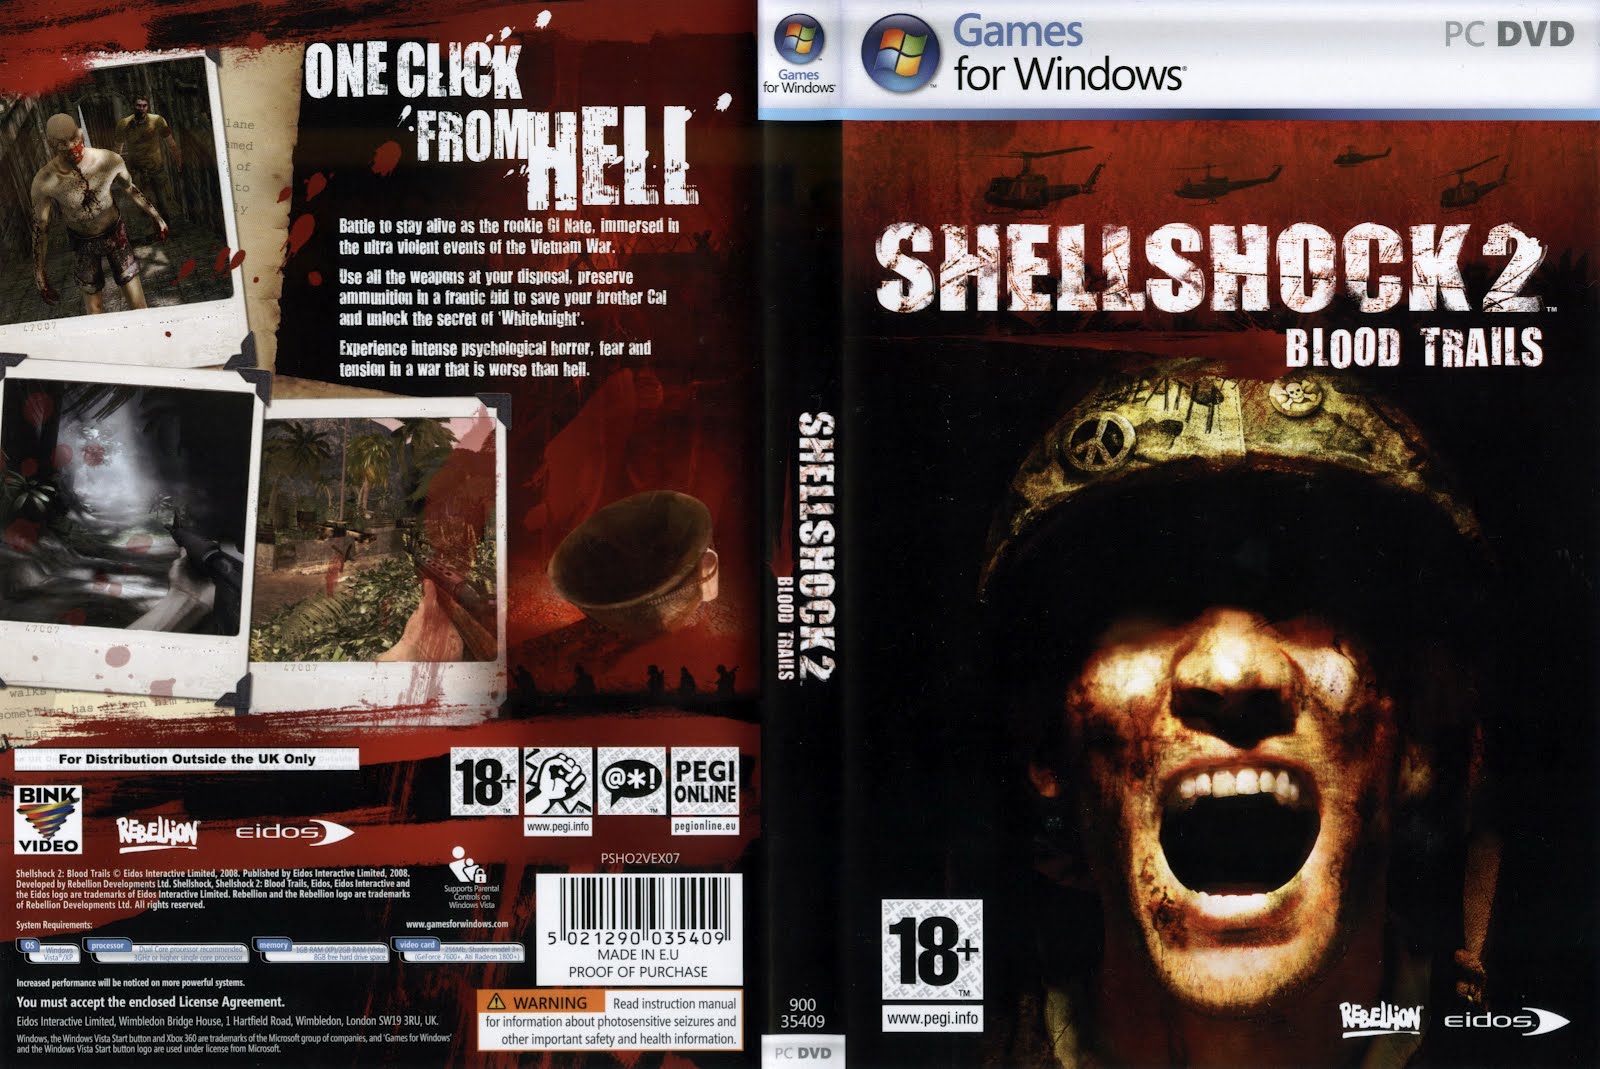 Shellshock 2: Blood Trails (PC DVD Game) Immersed in the ultra